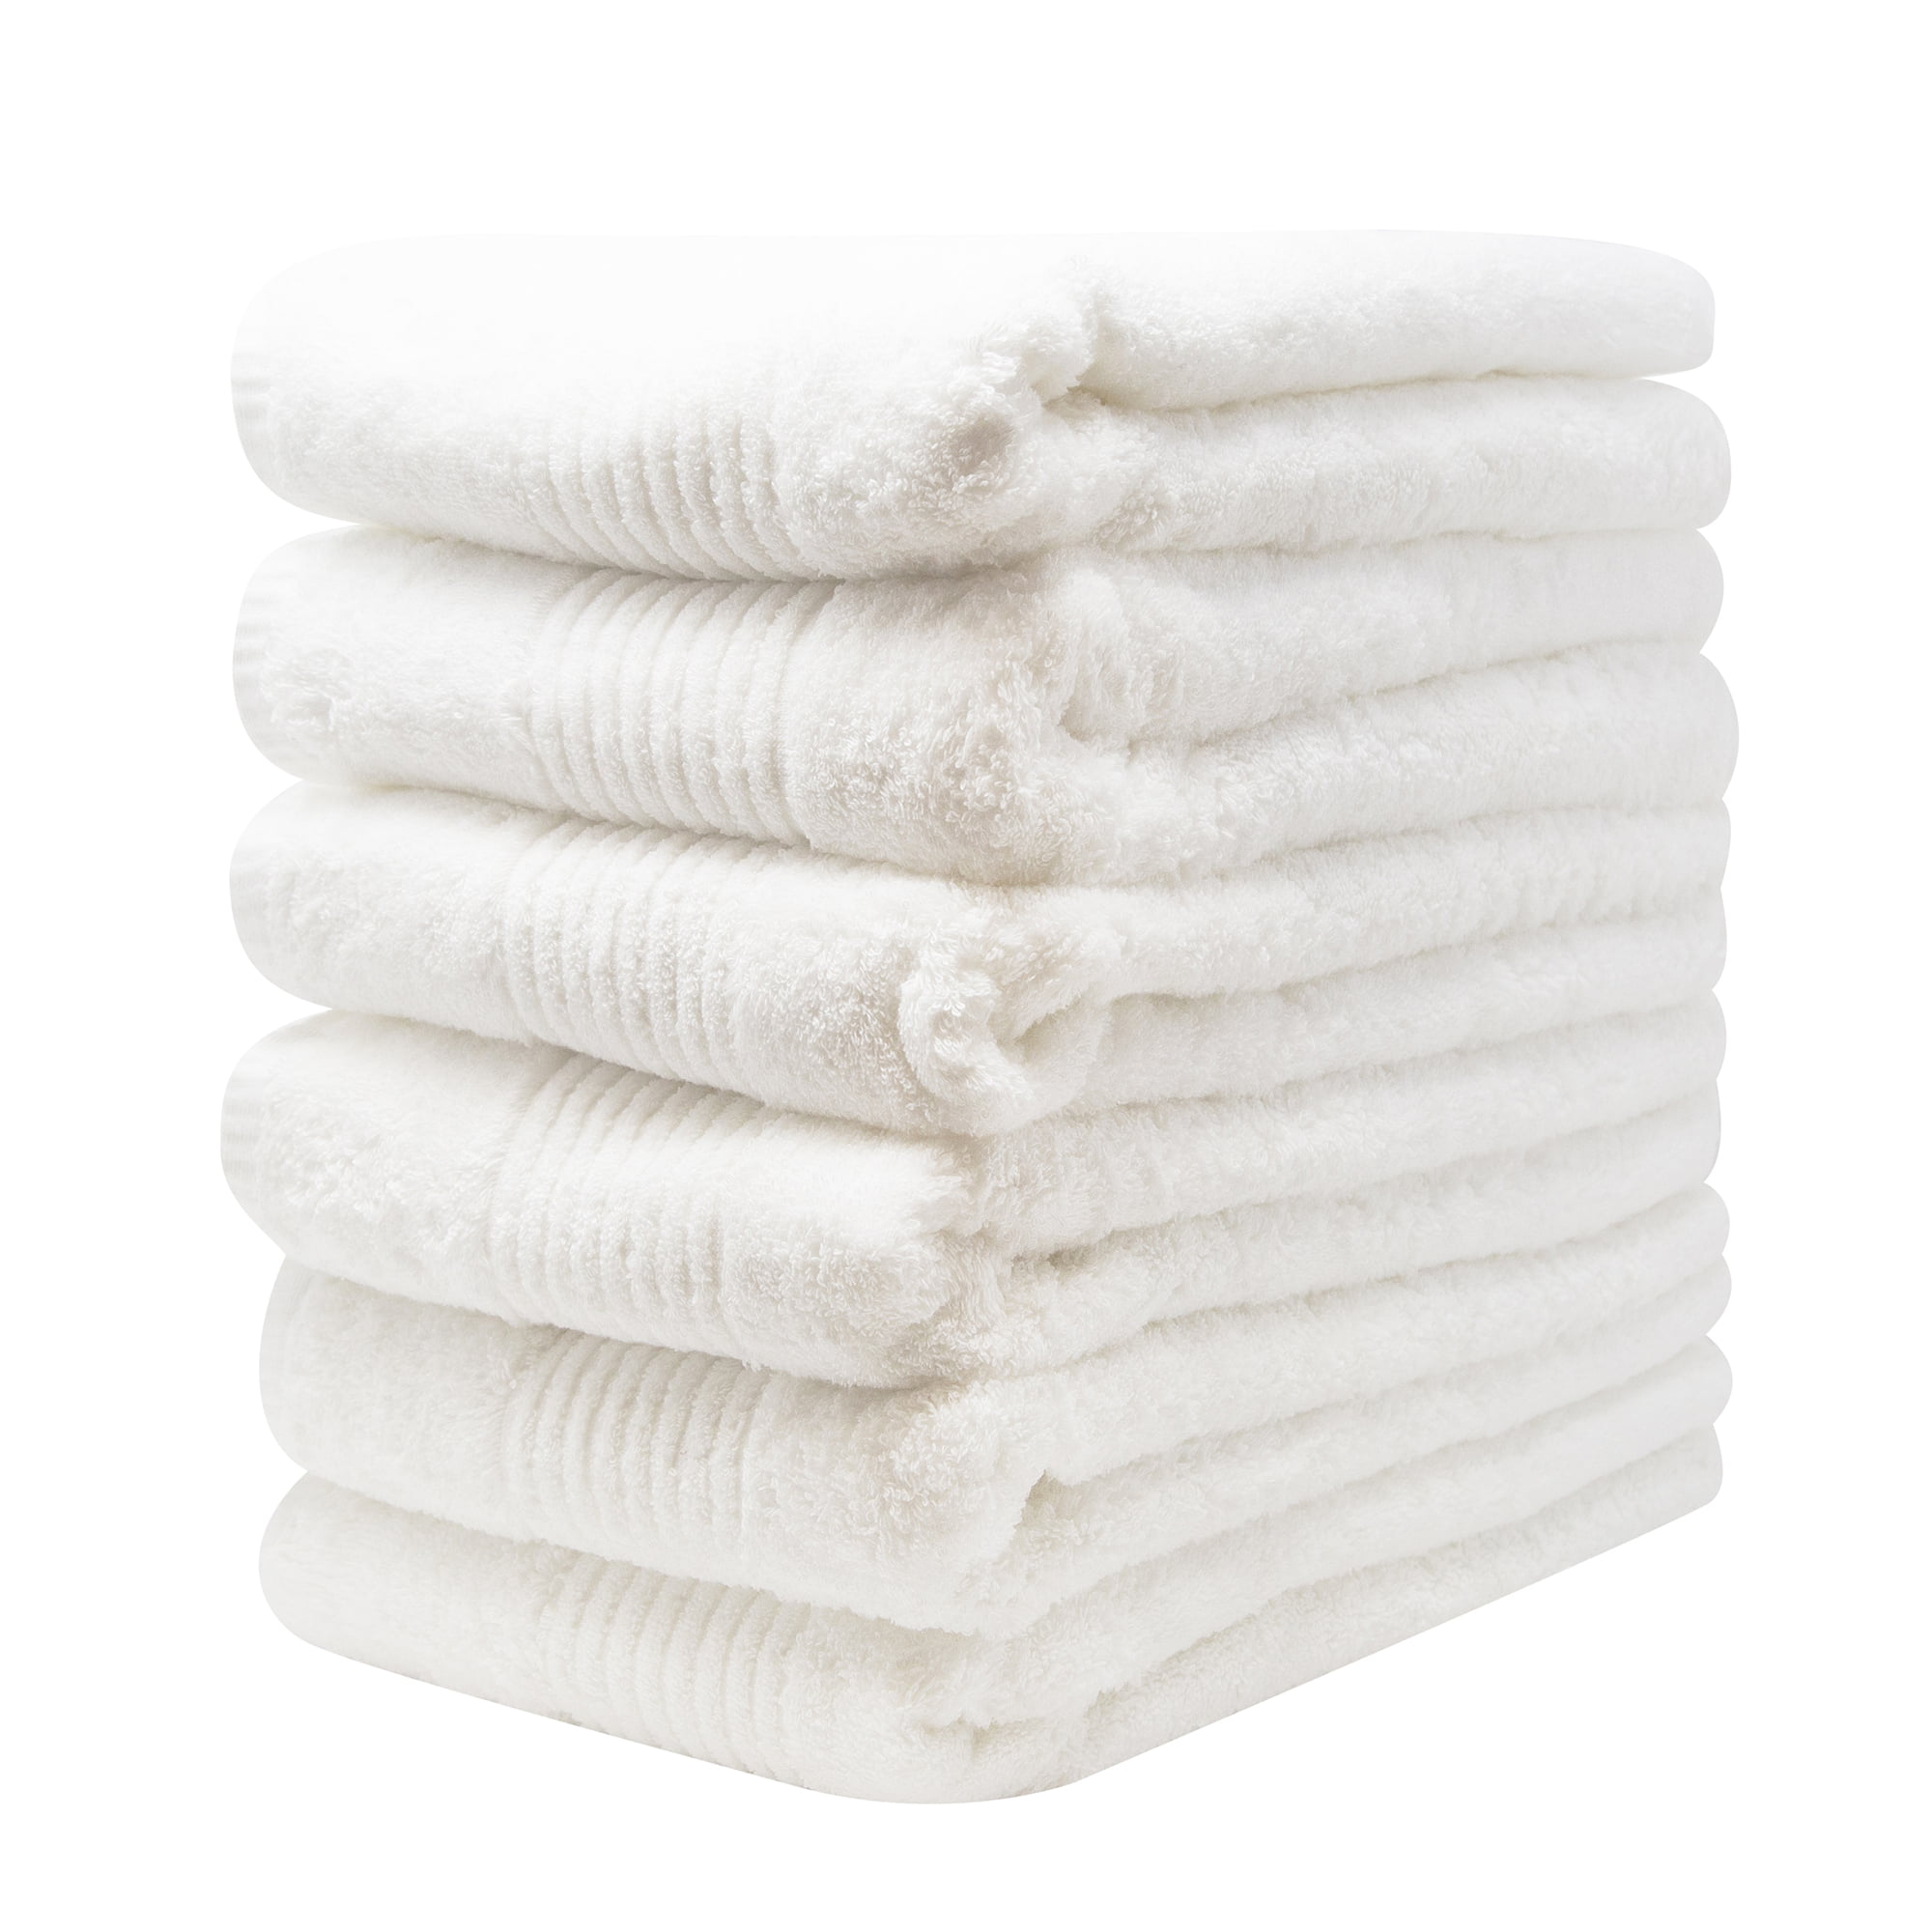 Elegant Absorbent Durable Luxurious 100% Egyptian Cotton Towels Soft 